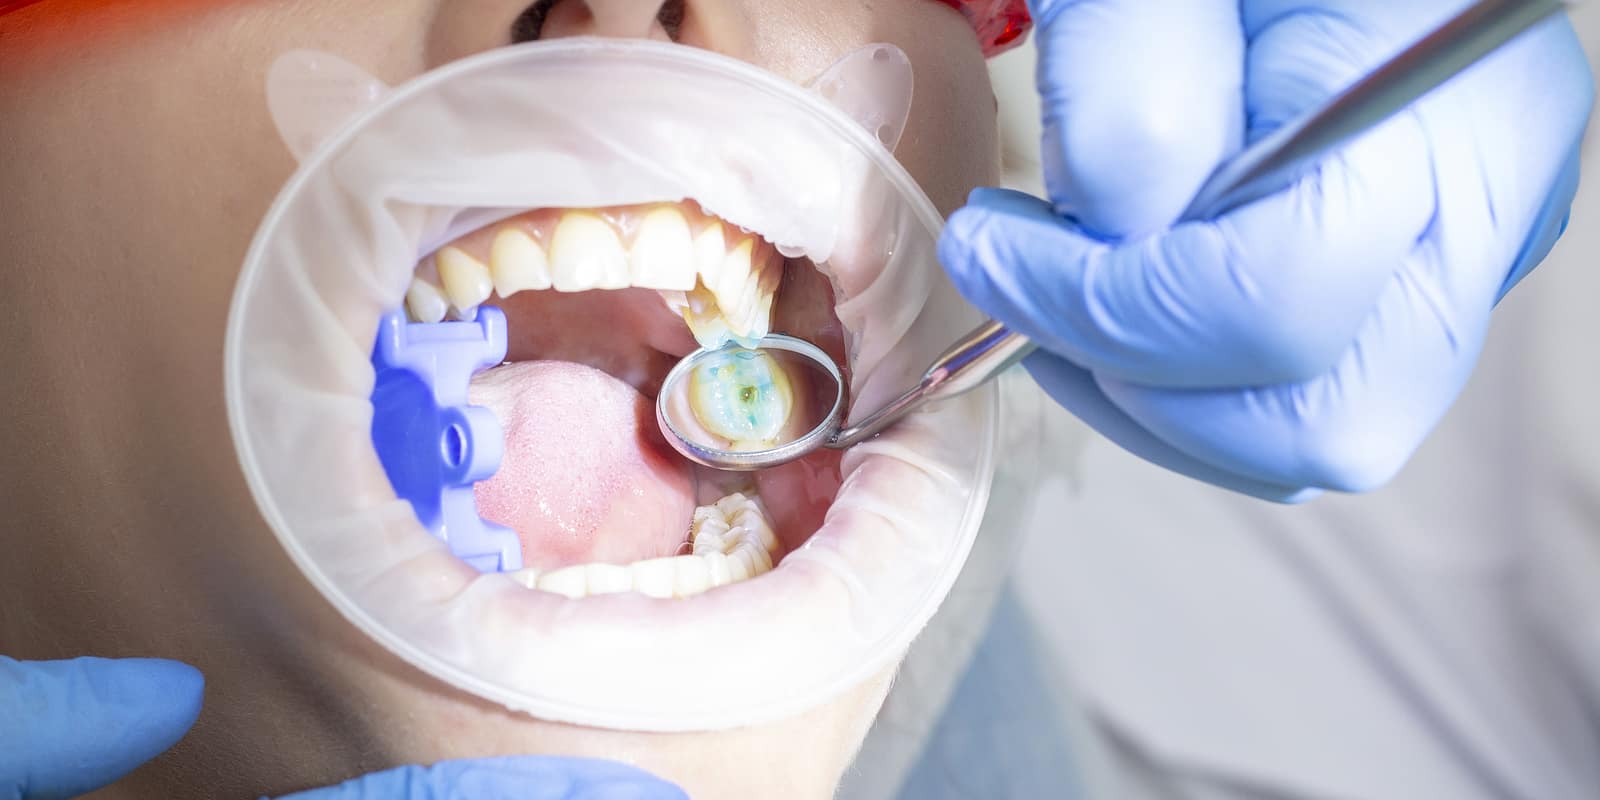 Is Wisdom Tooth Extraction Treatment A Simple Process